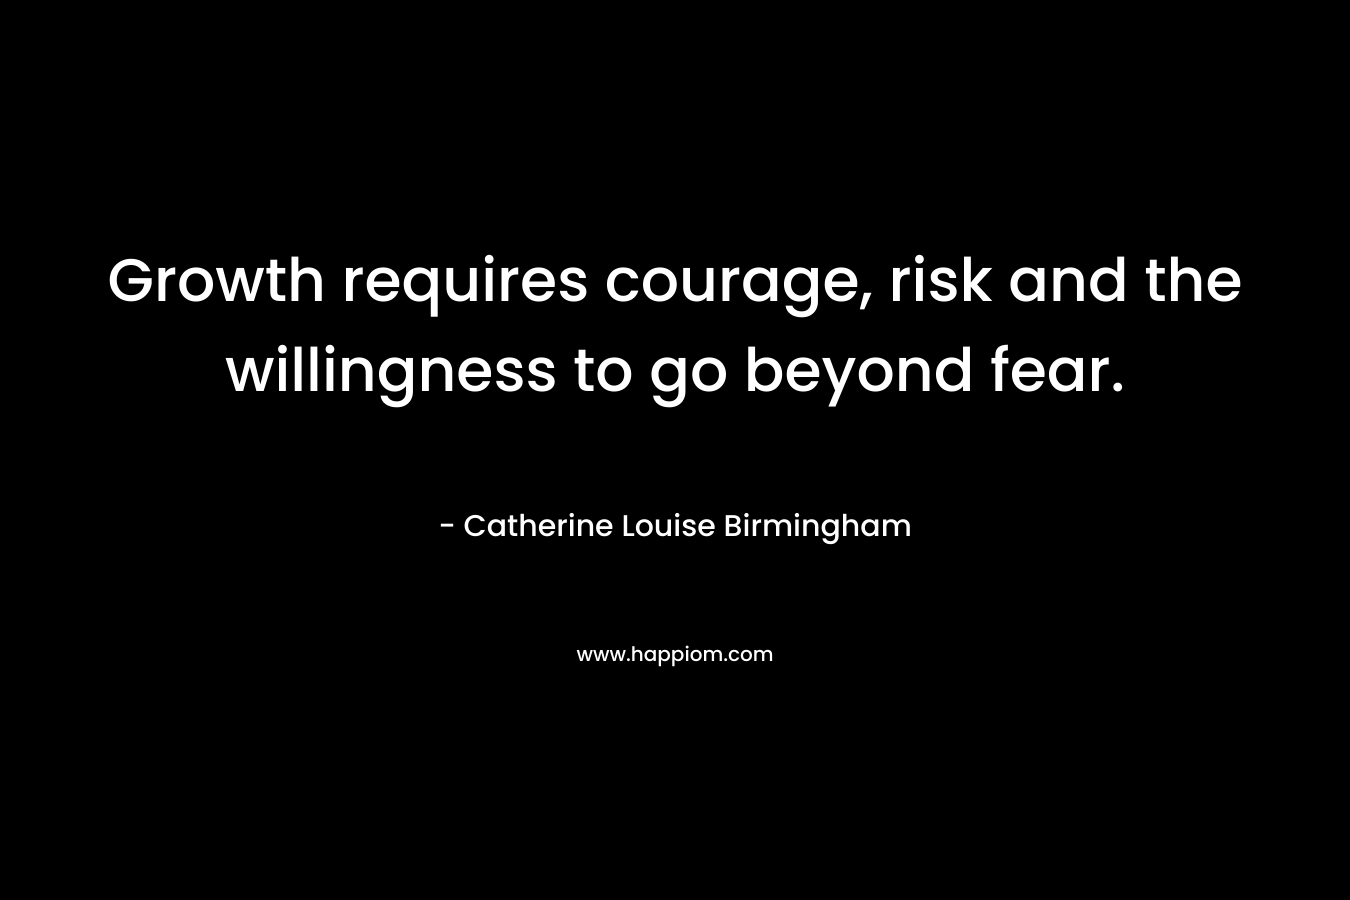 Growth requires courage, risk and the willingness to go beyond fear.